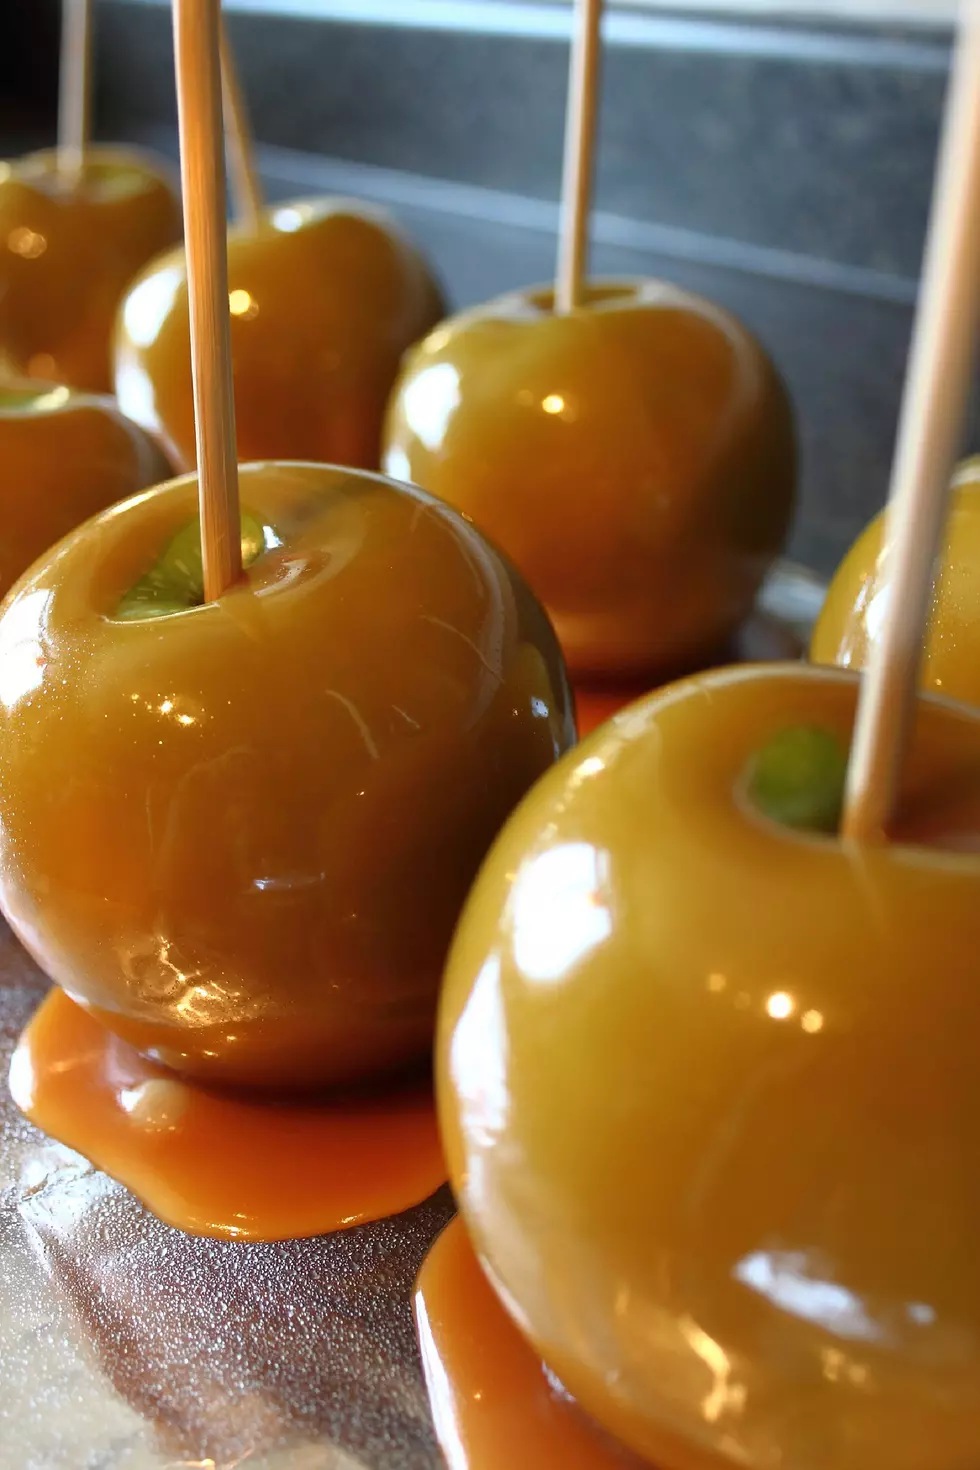 This Is The Proper Way To Eat A Caramel Apple, According To A Candy Expert